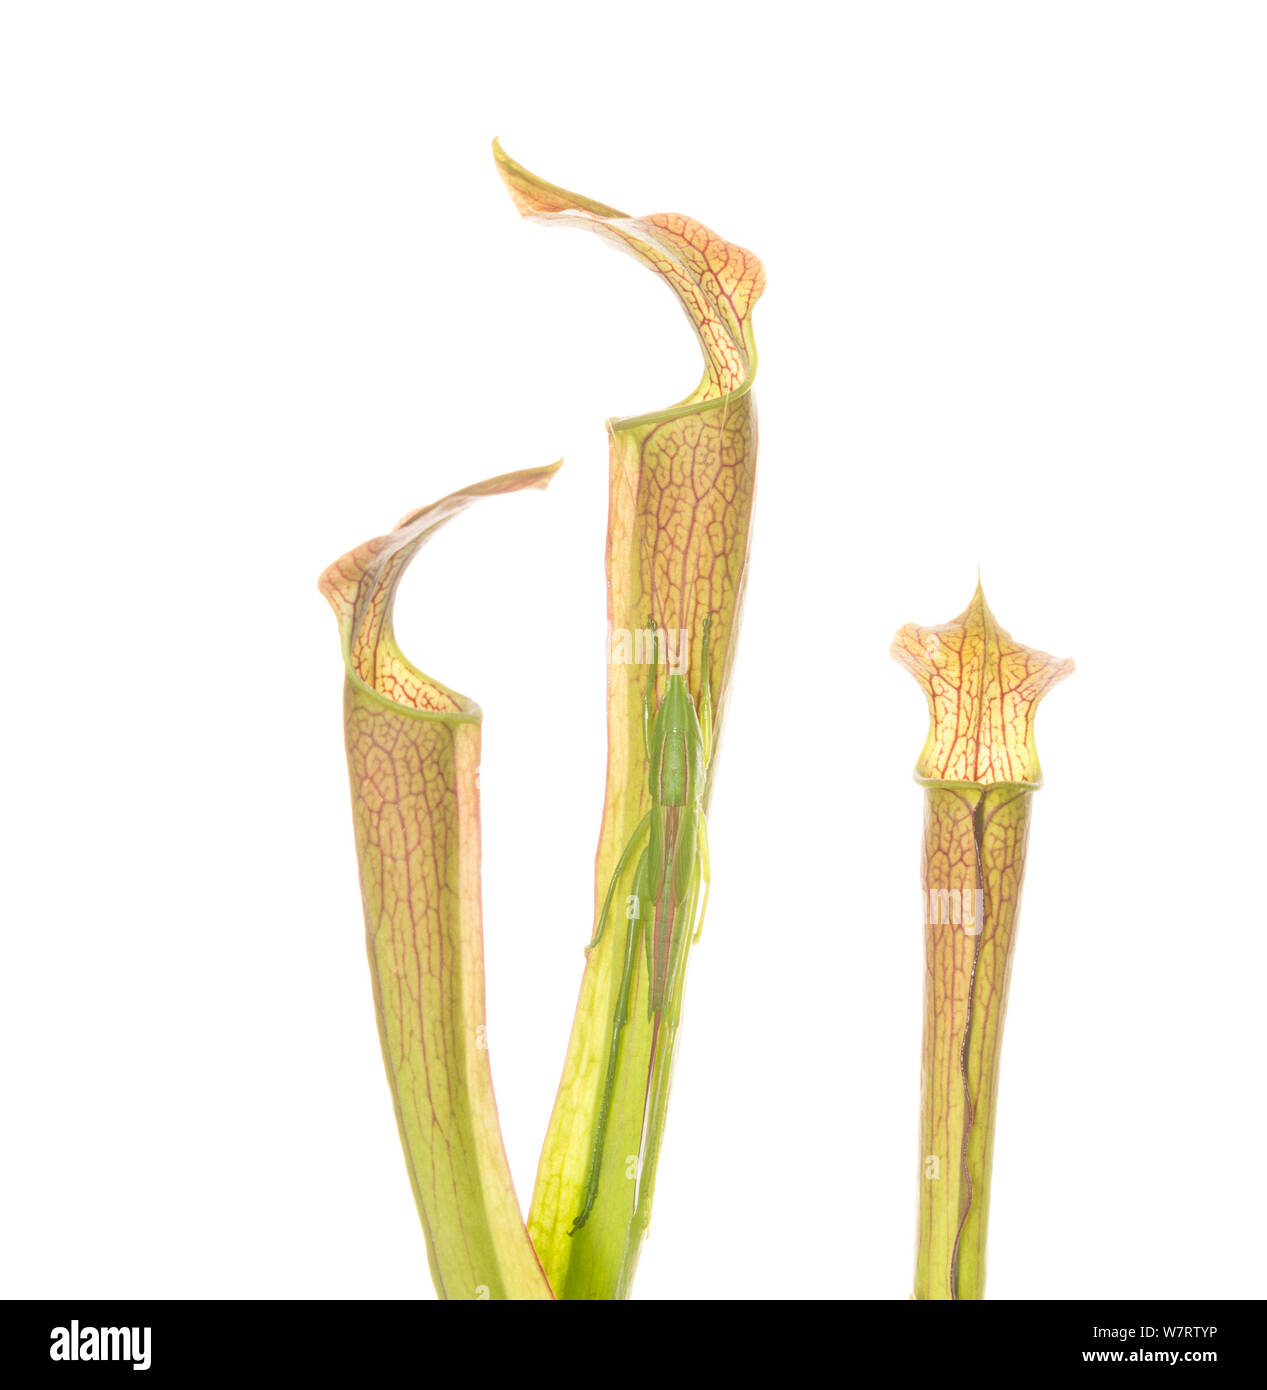 FYI - INSECT ON PLANT -An endangered plant, the mountain sweet pitcher plant (Sarracenia rubra ssp. jonesii) is found in the mountains of South Carolina and North Carolina. This plant was photographed in the Chandler Heritage Preserve in South Carolina. Stock Photo